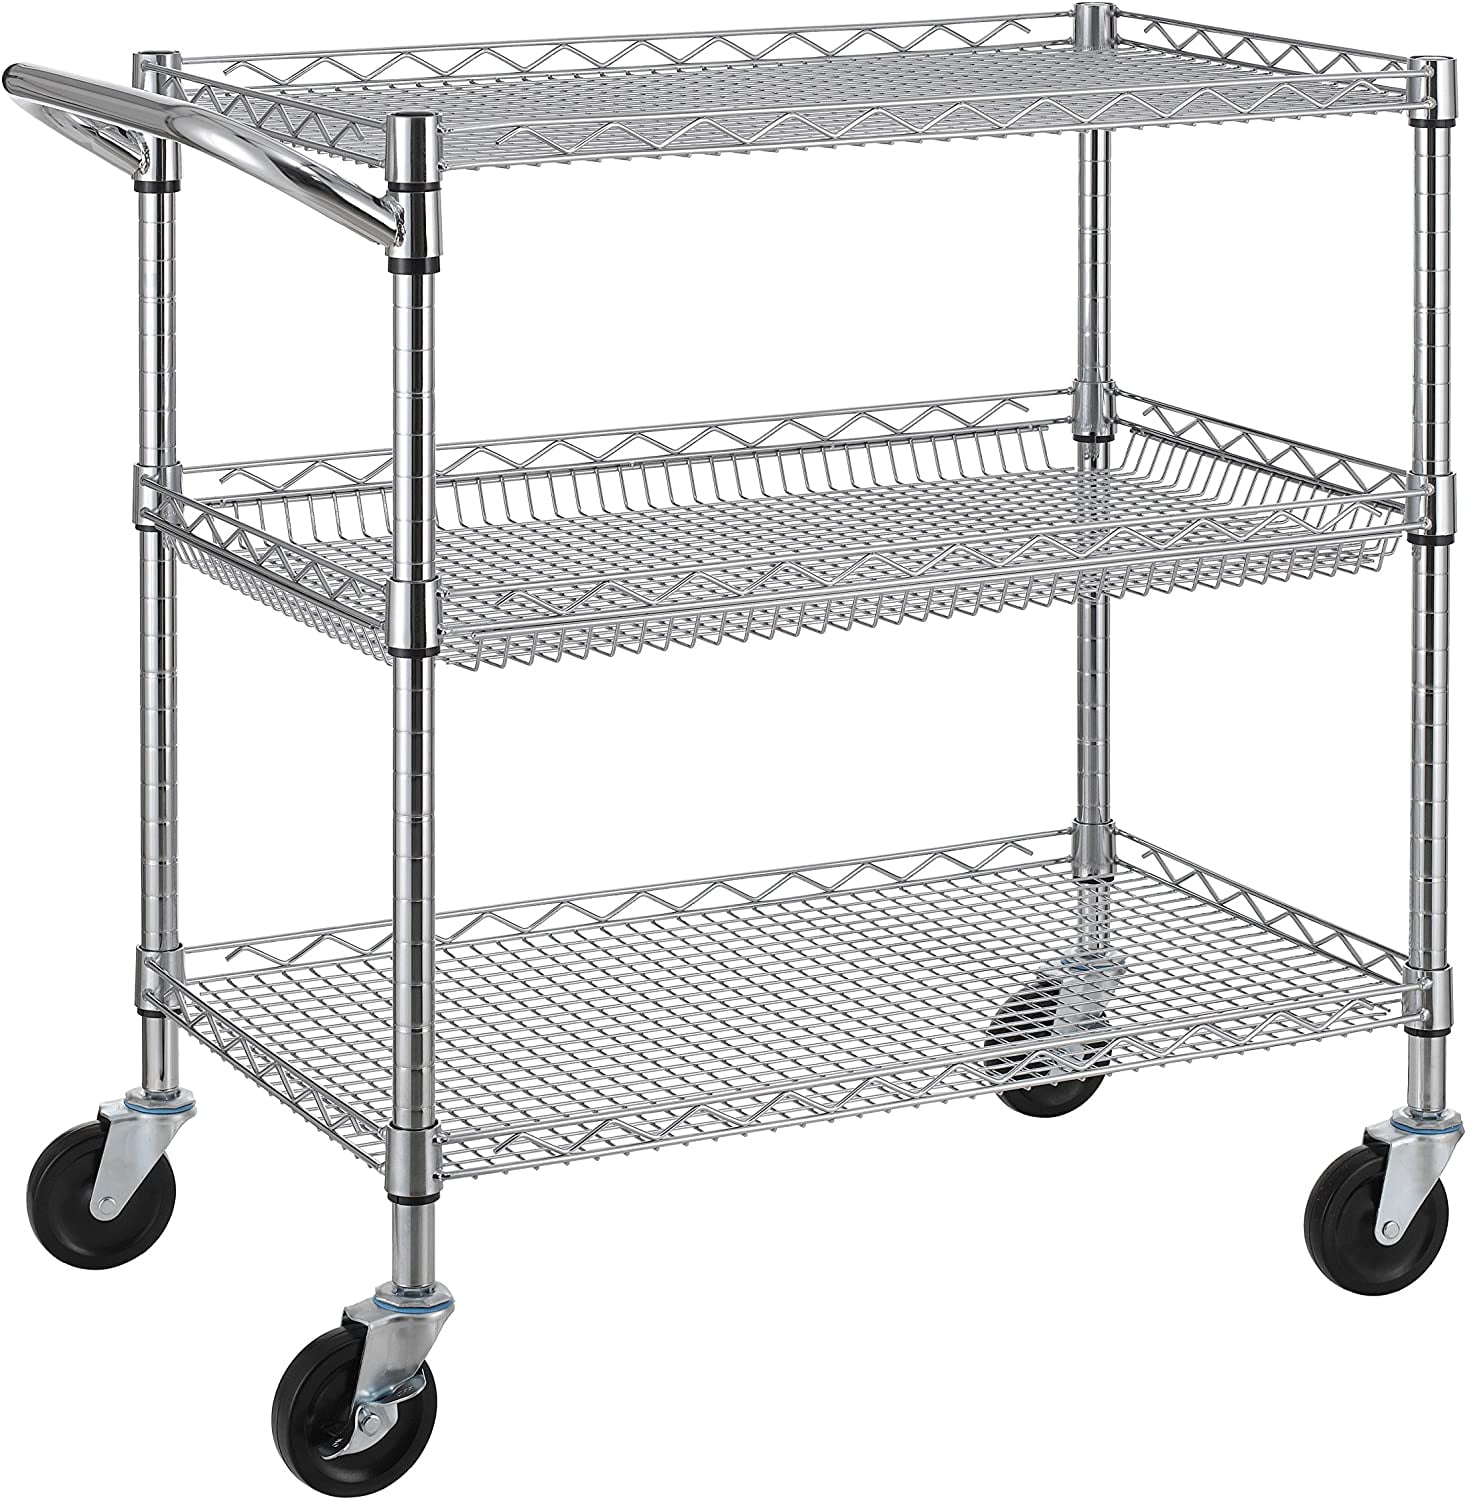 NSF Listed Seville Classics Heavy-Duty Commercial-Grade Utility Cart 